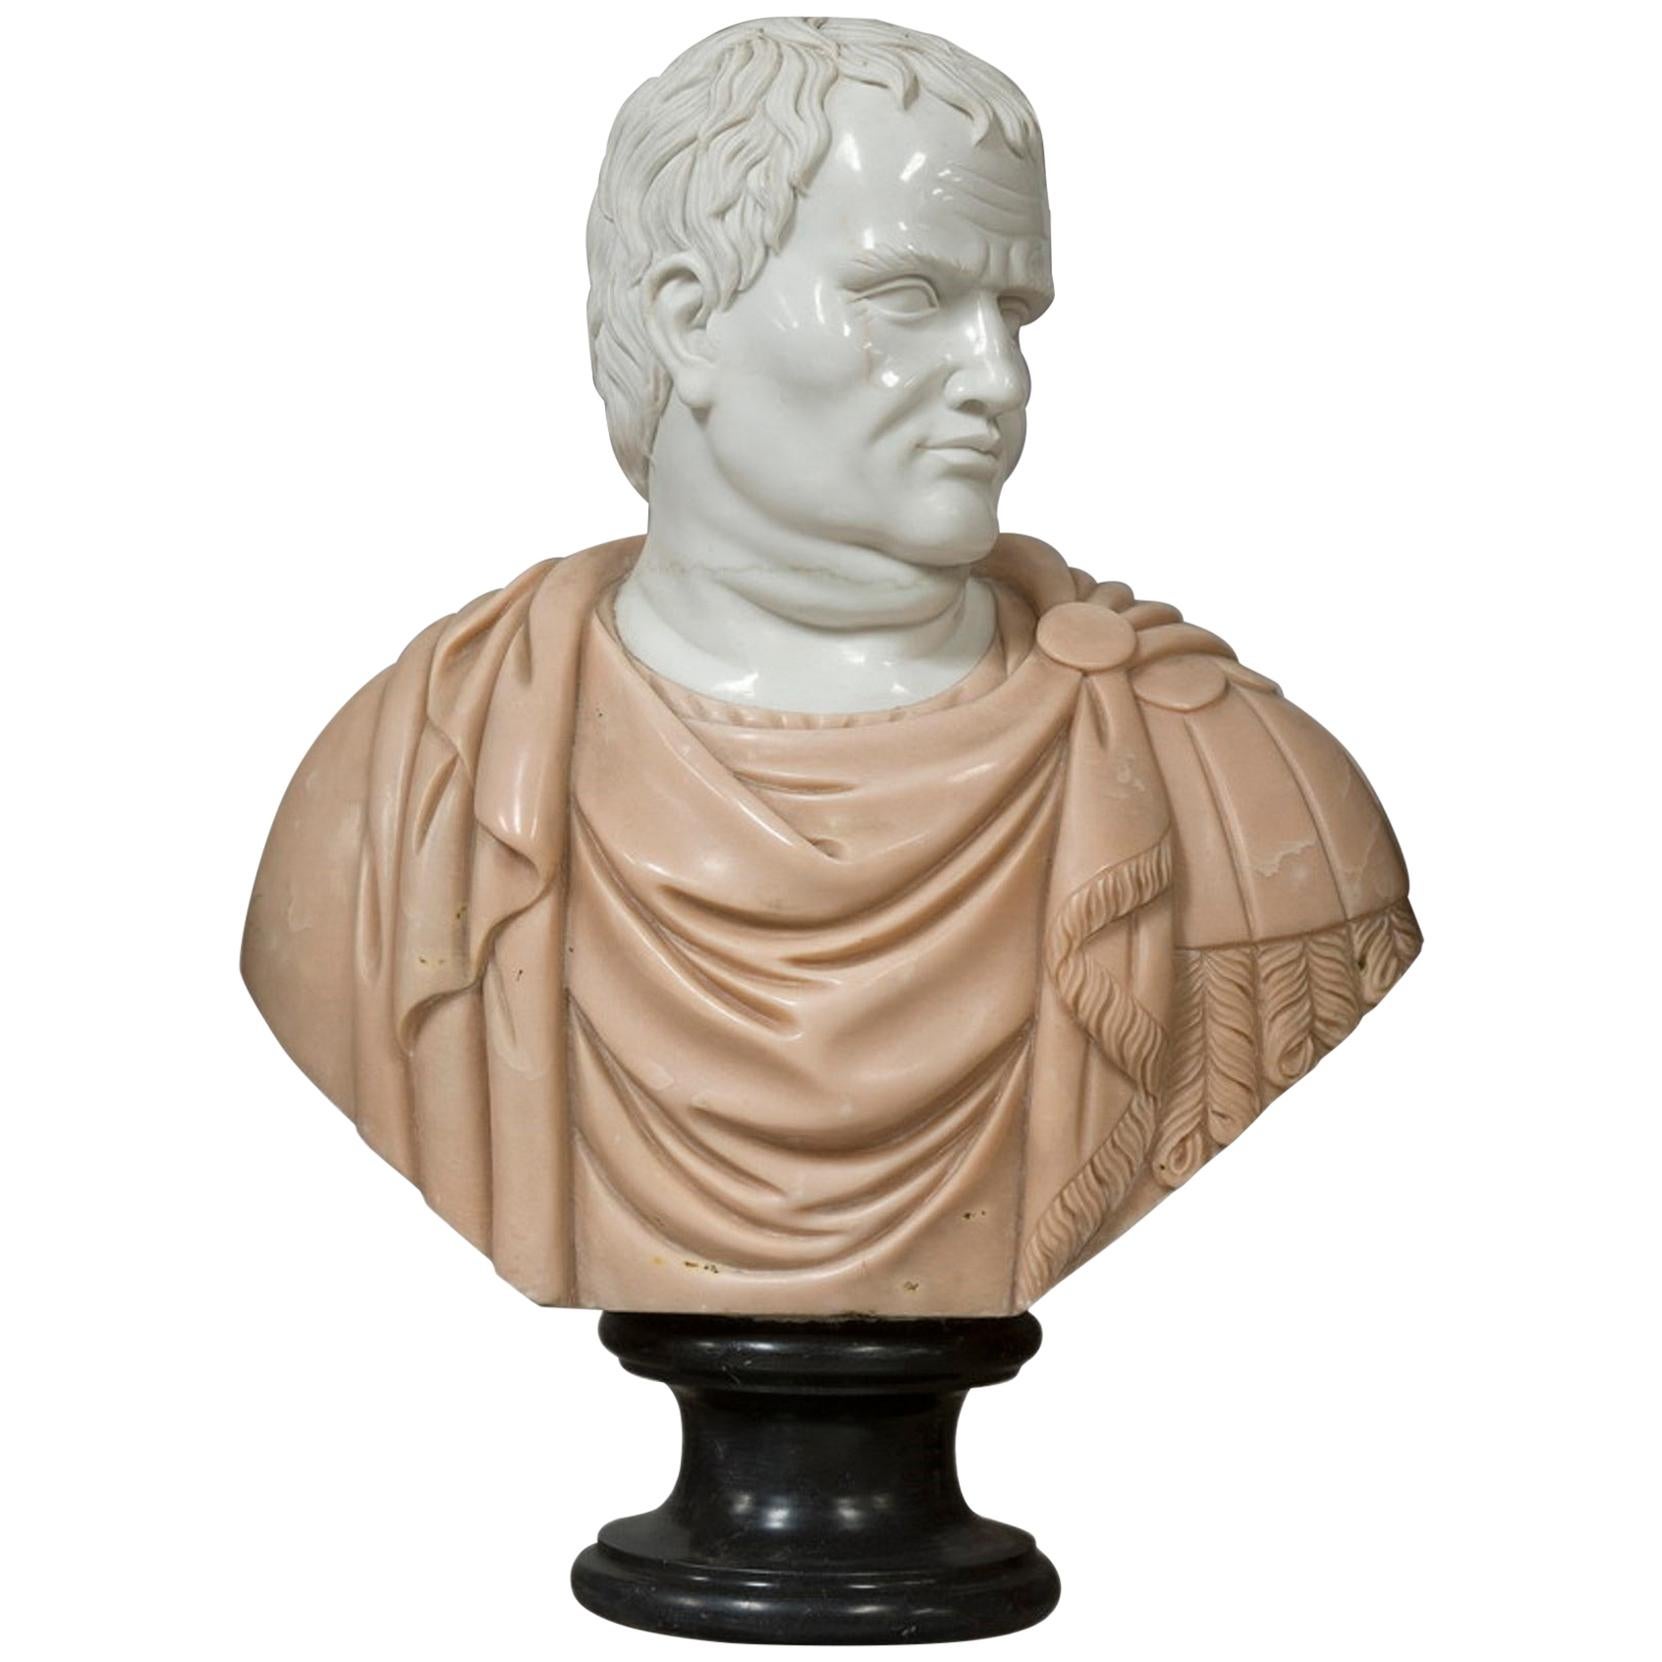 Marble Sculpture Inspired by Busts Portraits of the Roman Empire